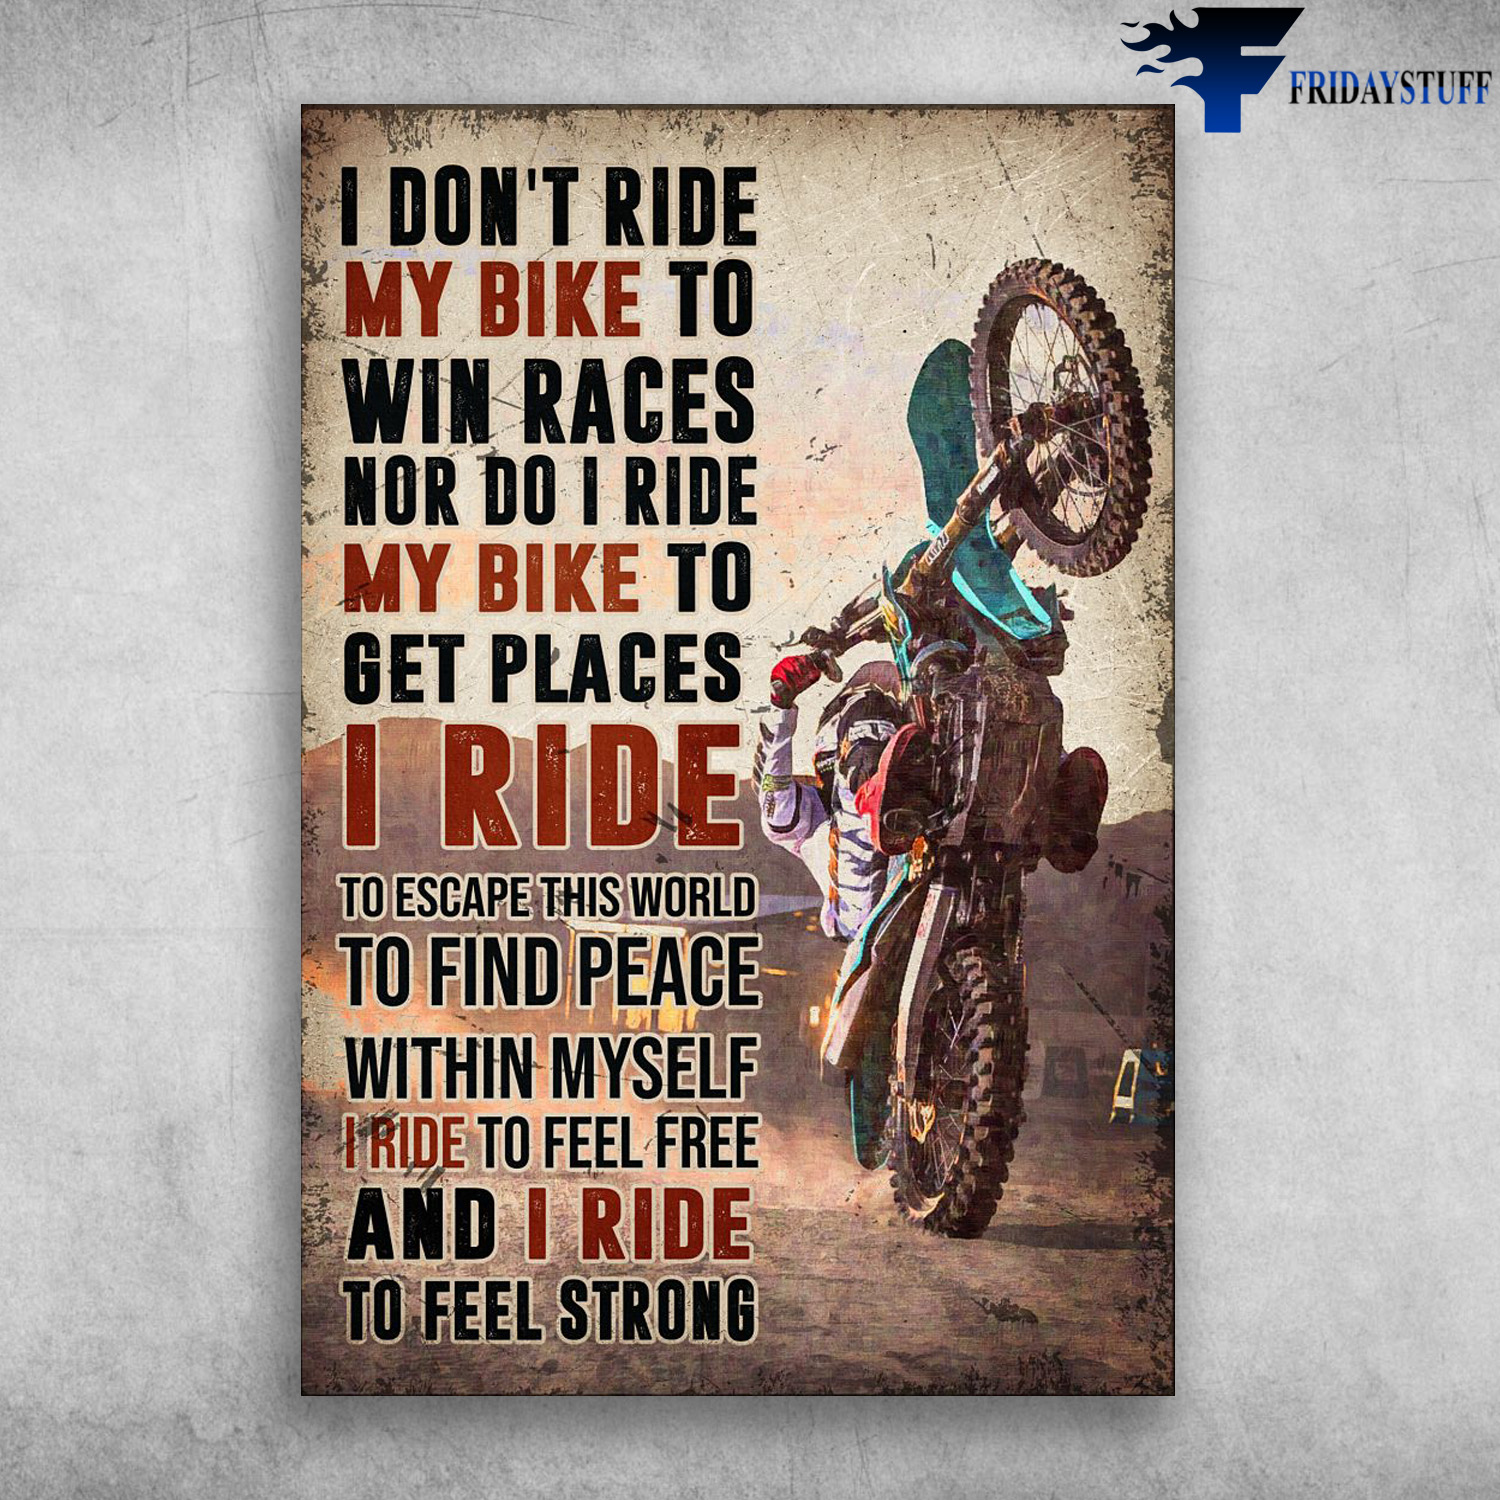 Motorcycle Man - I Don't Ride My Bike To Win Races, Nor Do I Ride My Bike To Get Places, I Ride To Escape This World, To Find Peace Within Myself, I Ride To Feel Free, And I Ride To Feel Strong